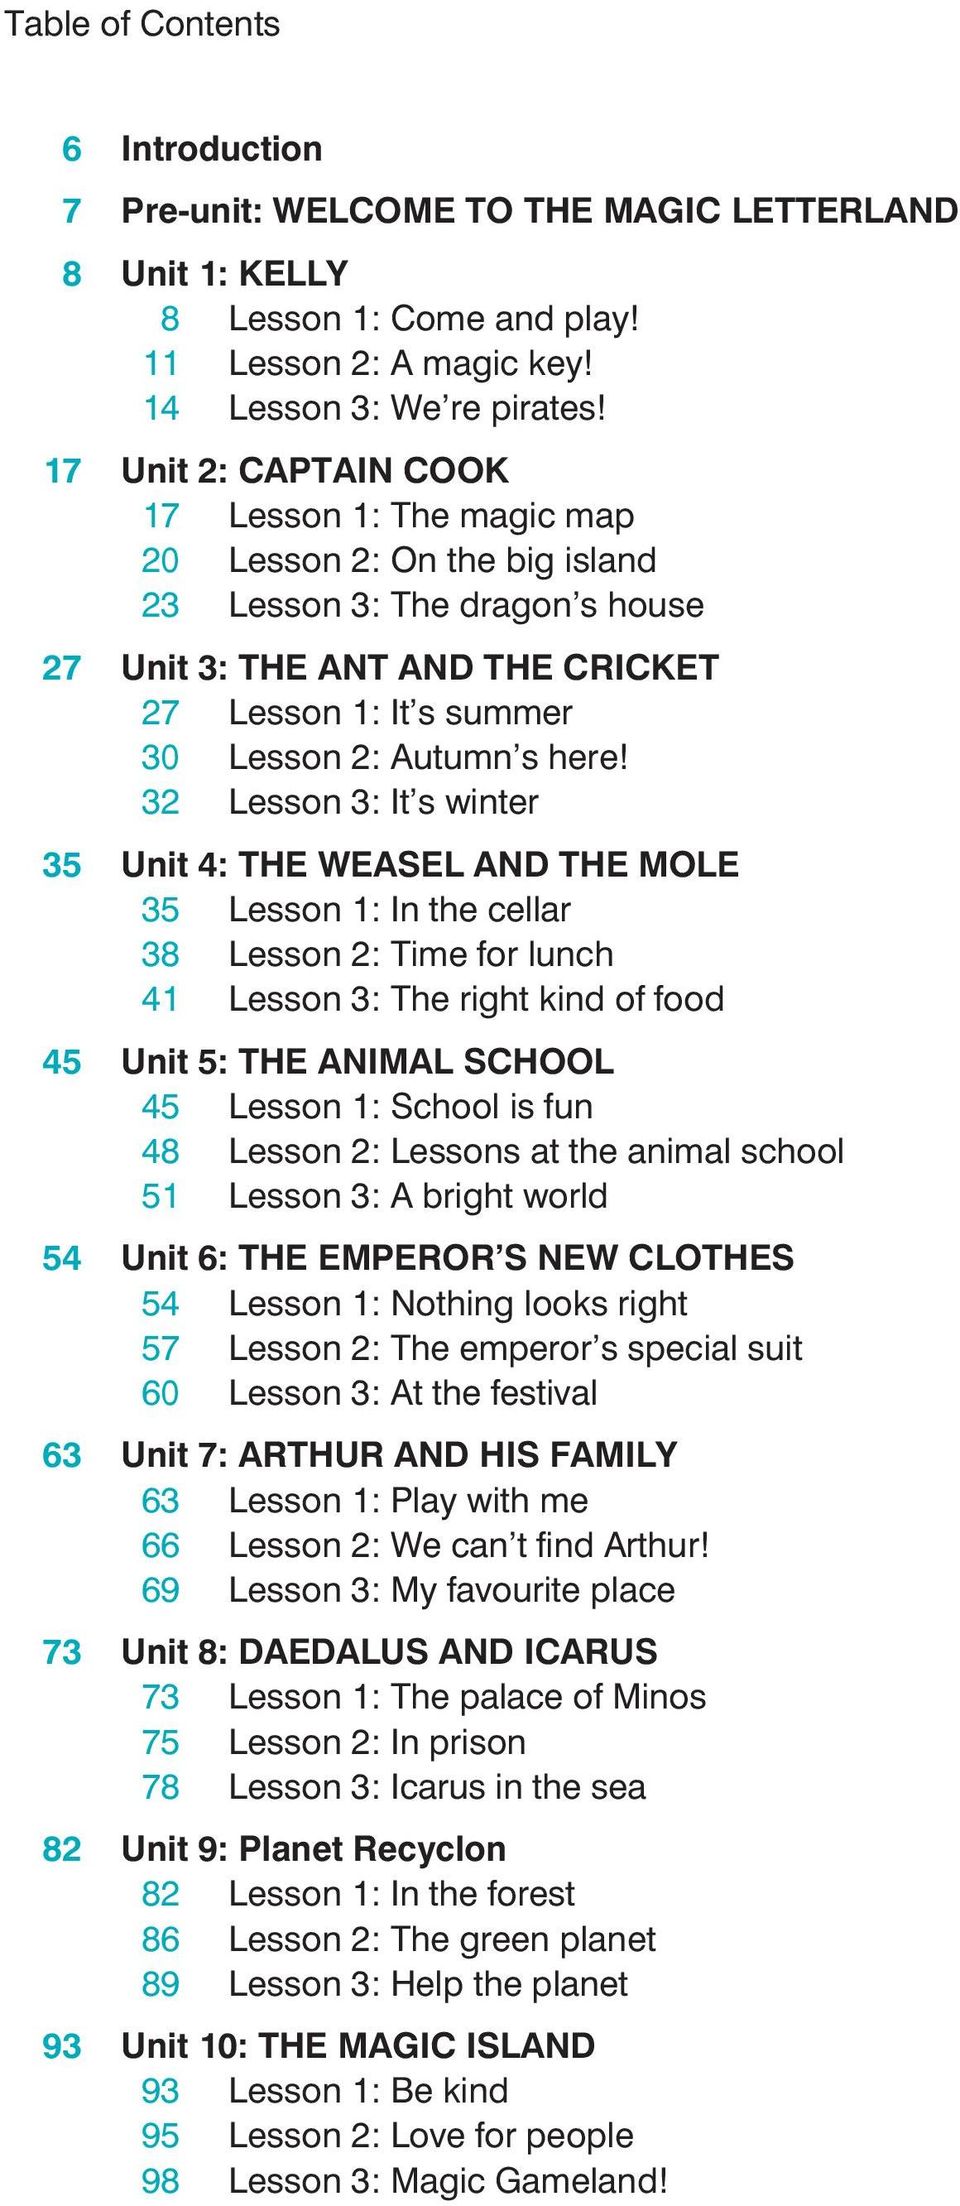 here! 32 Lesson 3: It's winter 35 Unit 4: THE WEASEL AND THE MOLE 35 Lesson 1: In the cellar 38 Lesson 2: Time for lunch 41 Lesson 3: The right kind of food 45 Unit 5: THE ANIMAL SCHOOL 45 Lesson 1: